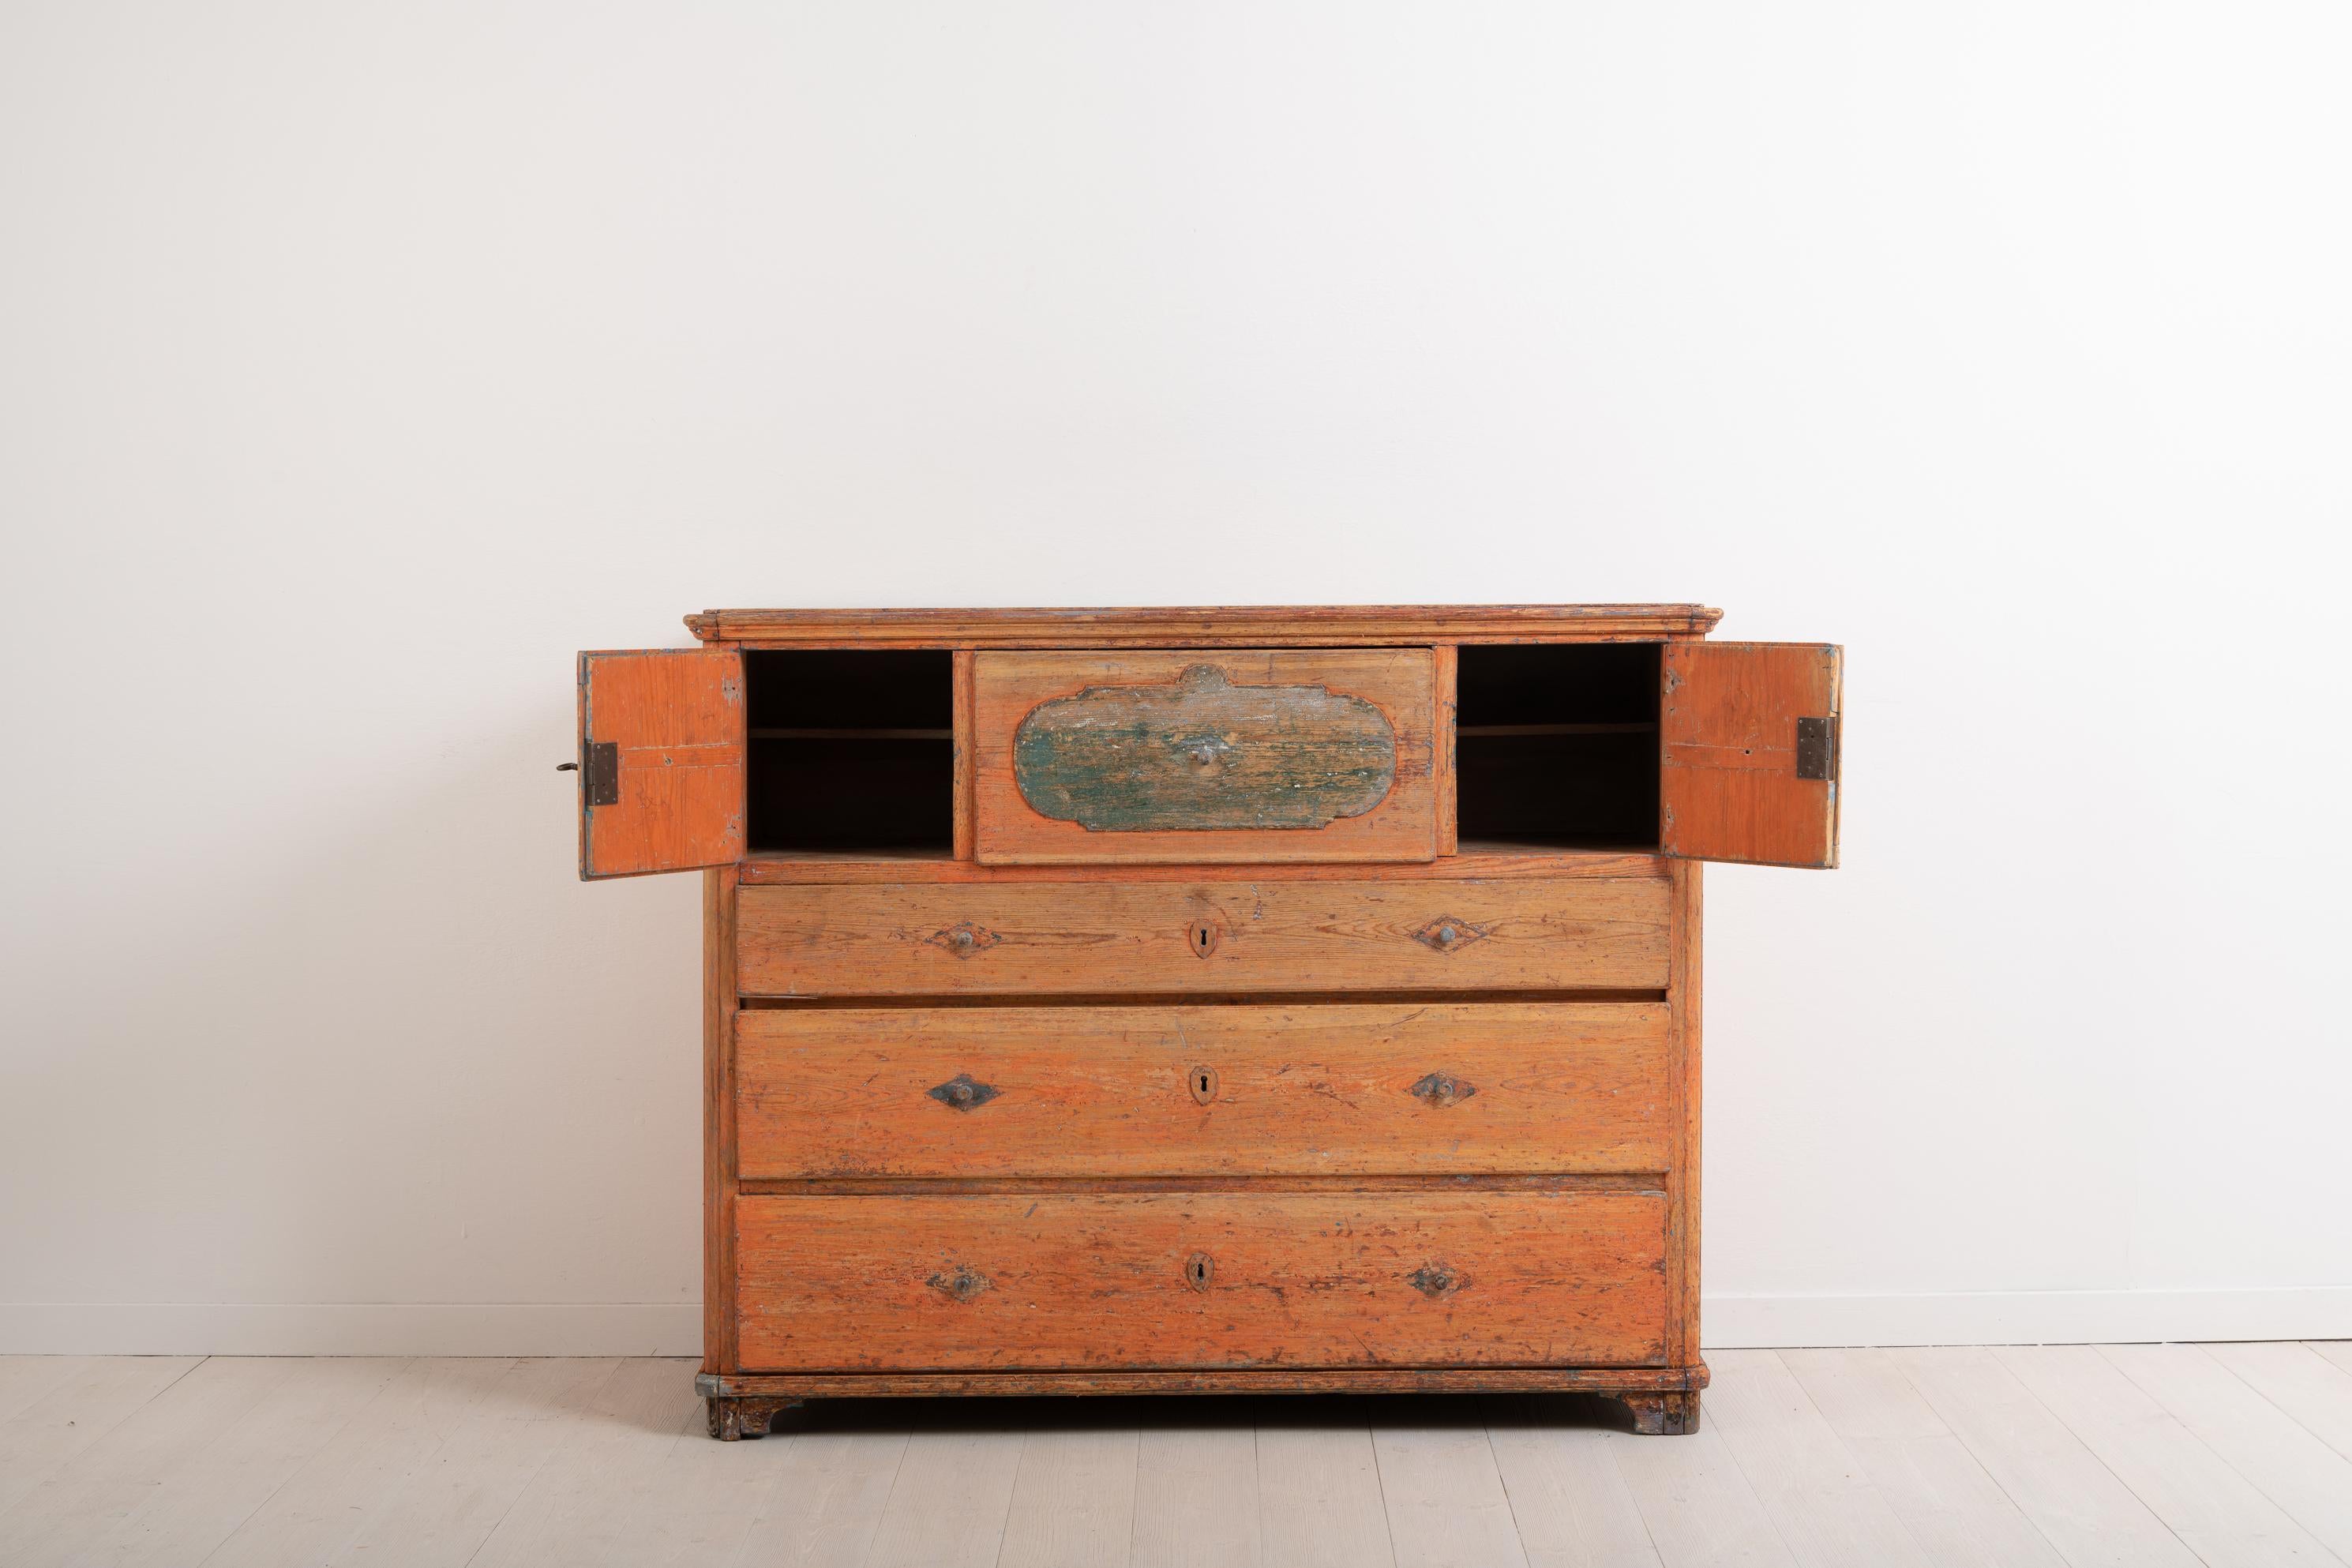 Hand-Crafted Swedish Early 19th Century Folk Art Chest of Drawers